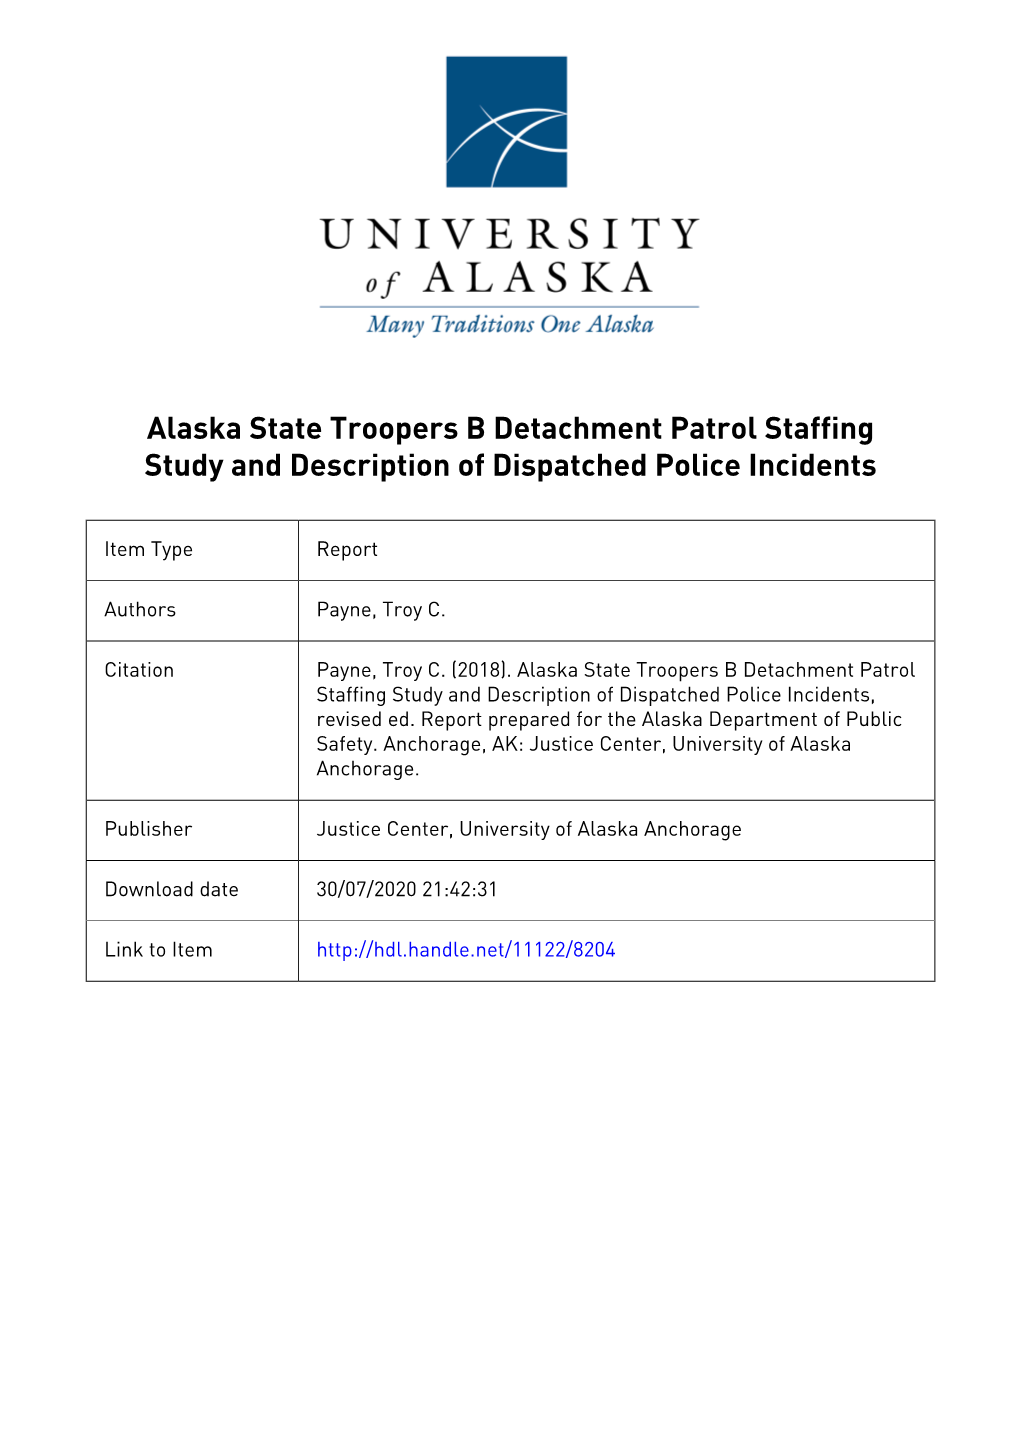 Alaska State Troopers B Detachment Patrol Staffing Study and Description of Dispatched Police Incidents